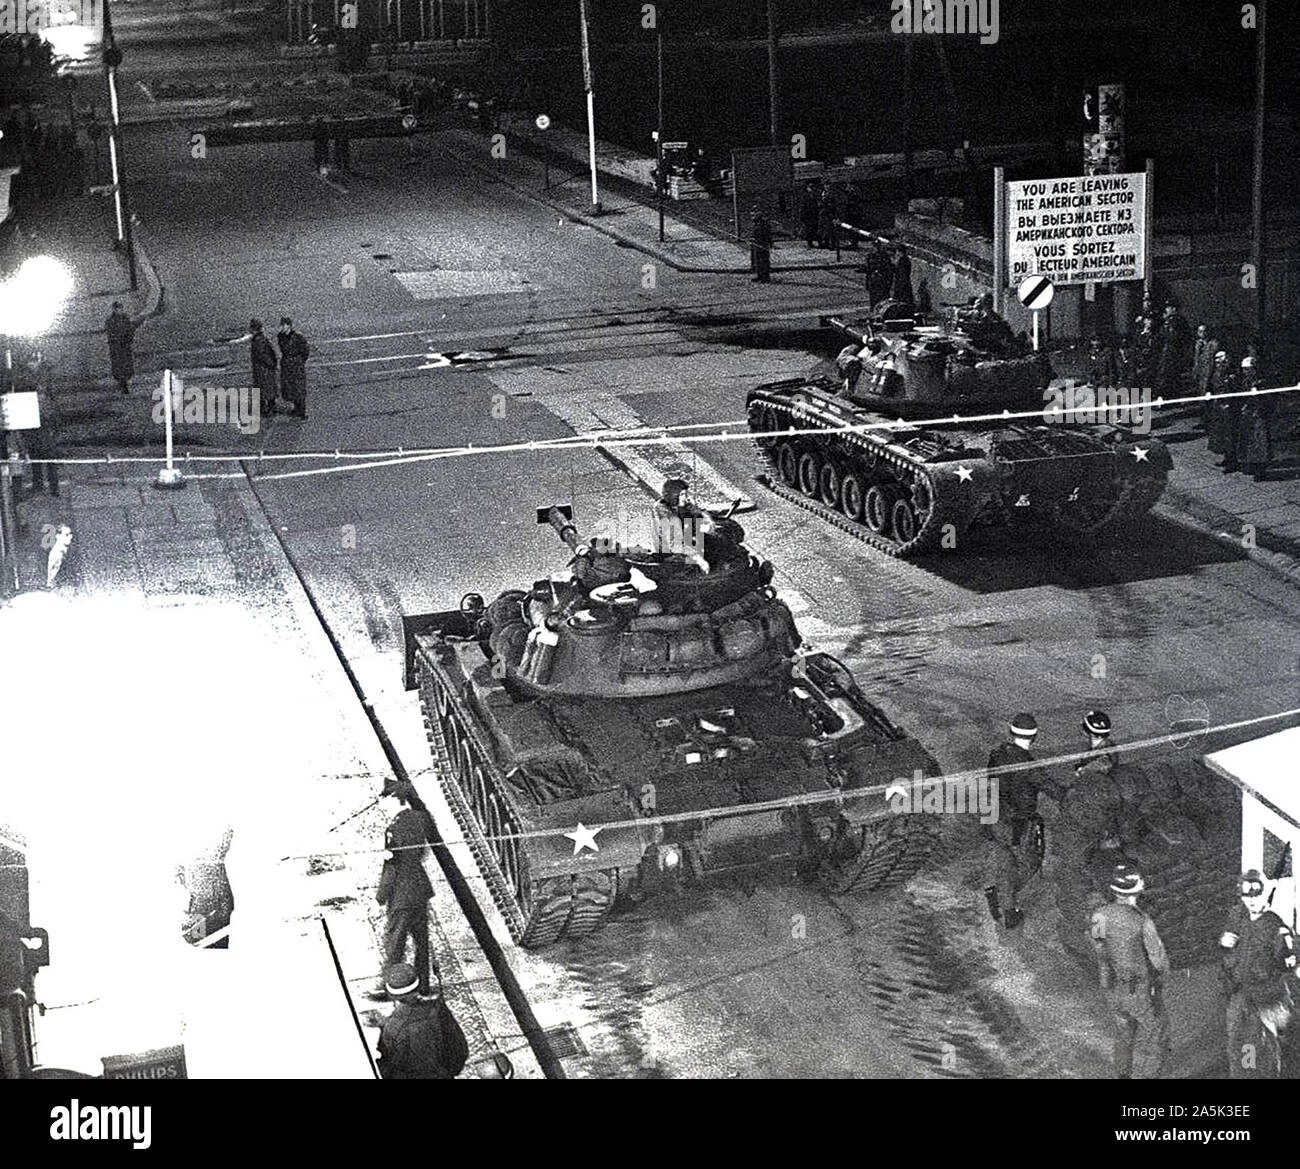 10/27/1961 - Nightly Tank Formation at Friedrich Strasse In Retaliation to Soviet Tanks Earlier That Day Due to An Incident of An American Civilian Crossing The Sector Border Without Showing His Passport Stock Photo